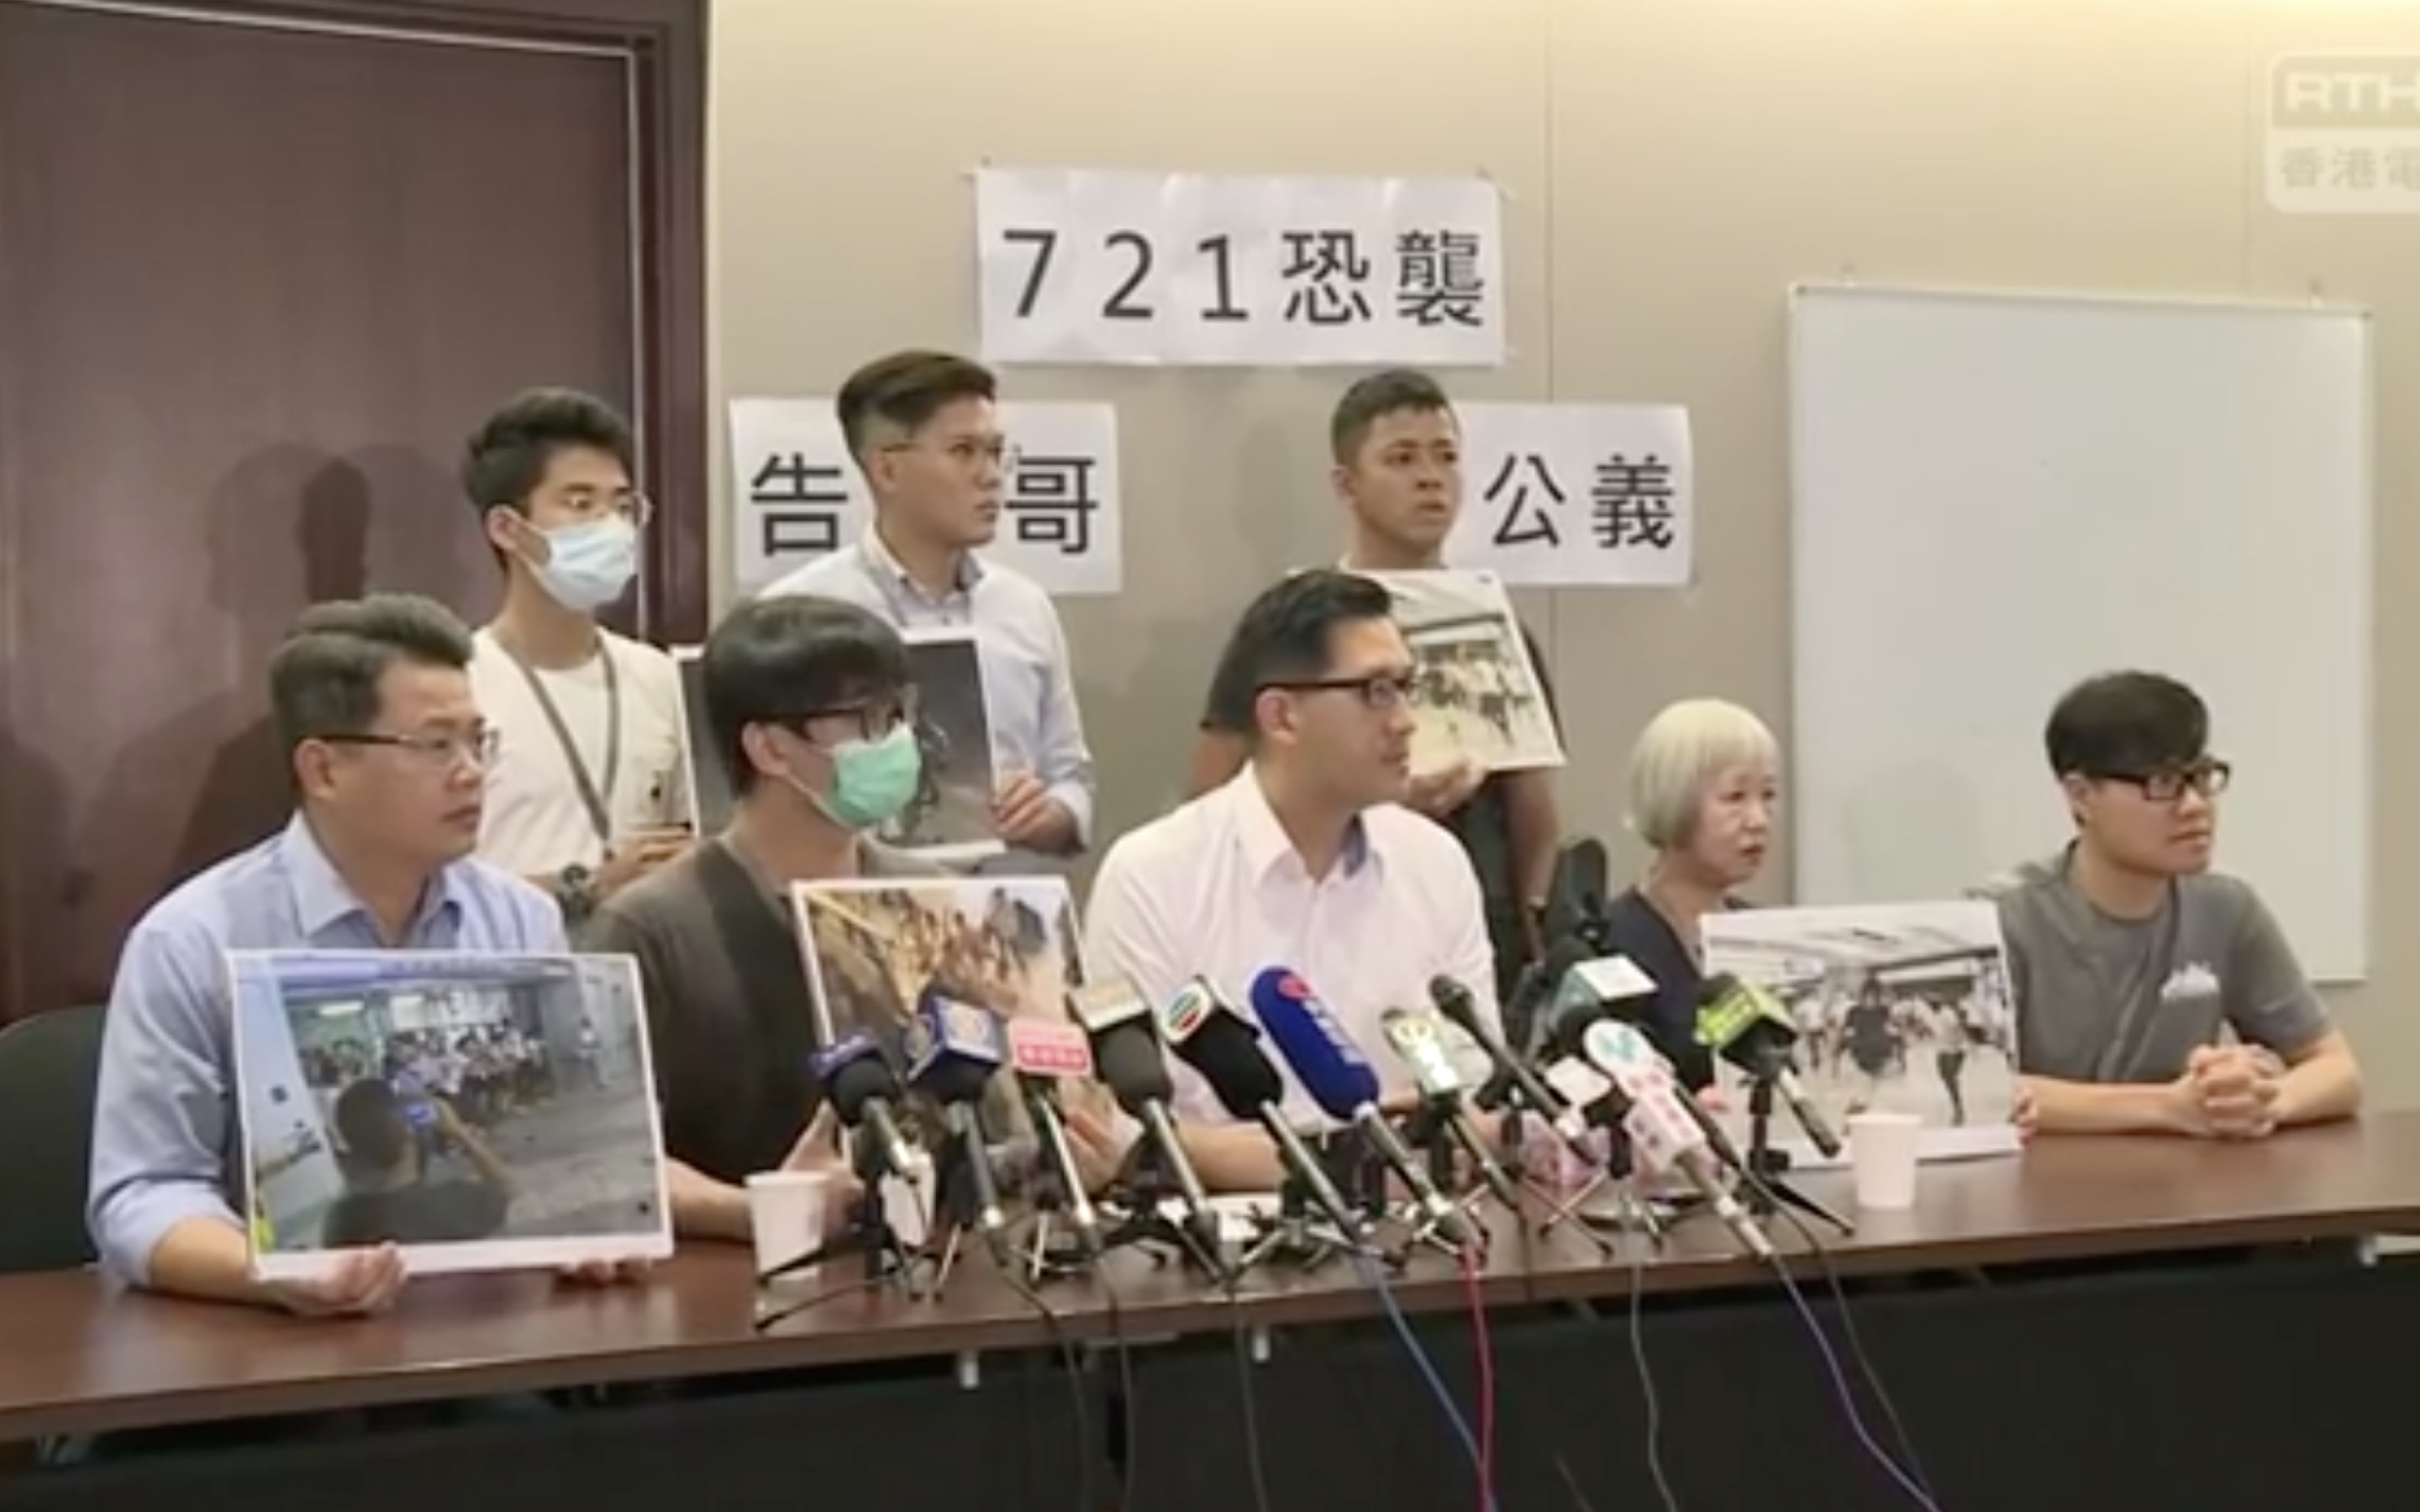 Lam Cheuk-ting (center) announces at a press conference that he and six other people will be suing the police over the Yuen Long attack on July 21. Screengrab via Facebook/RTHK.